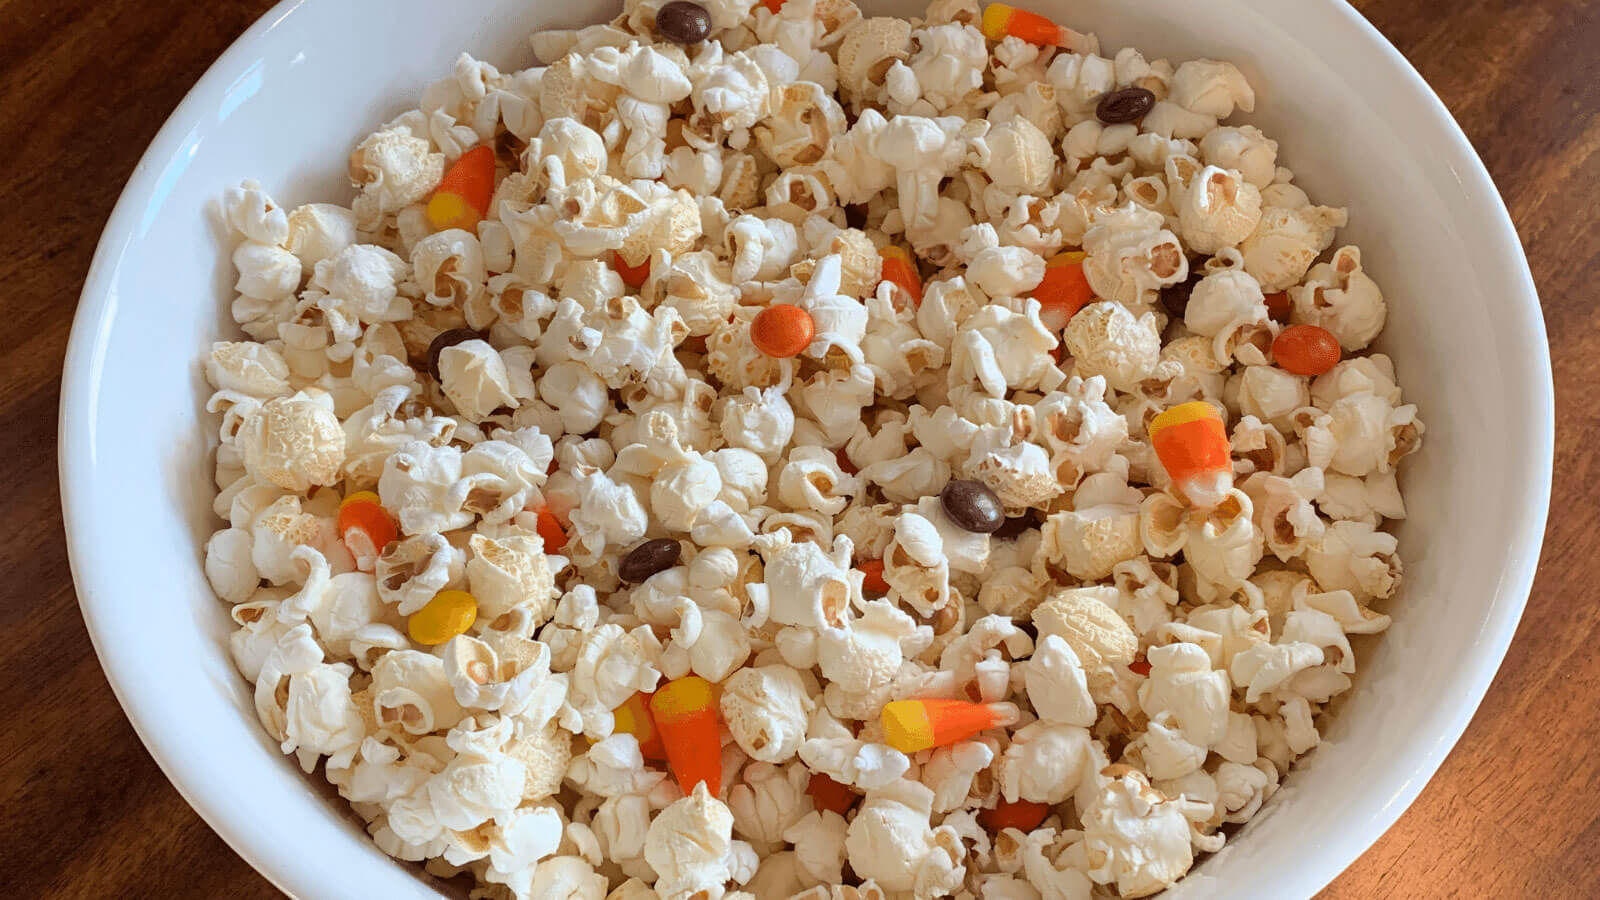 Bowl of popcorn with candy.